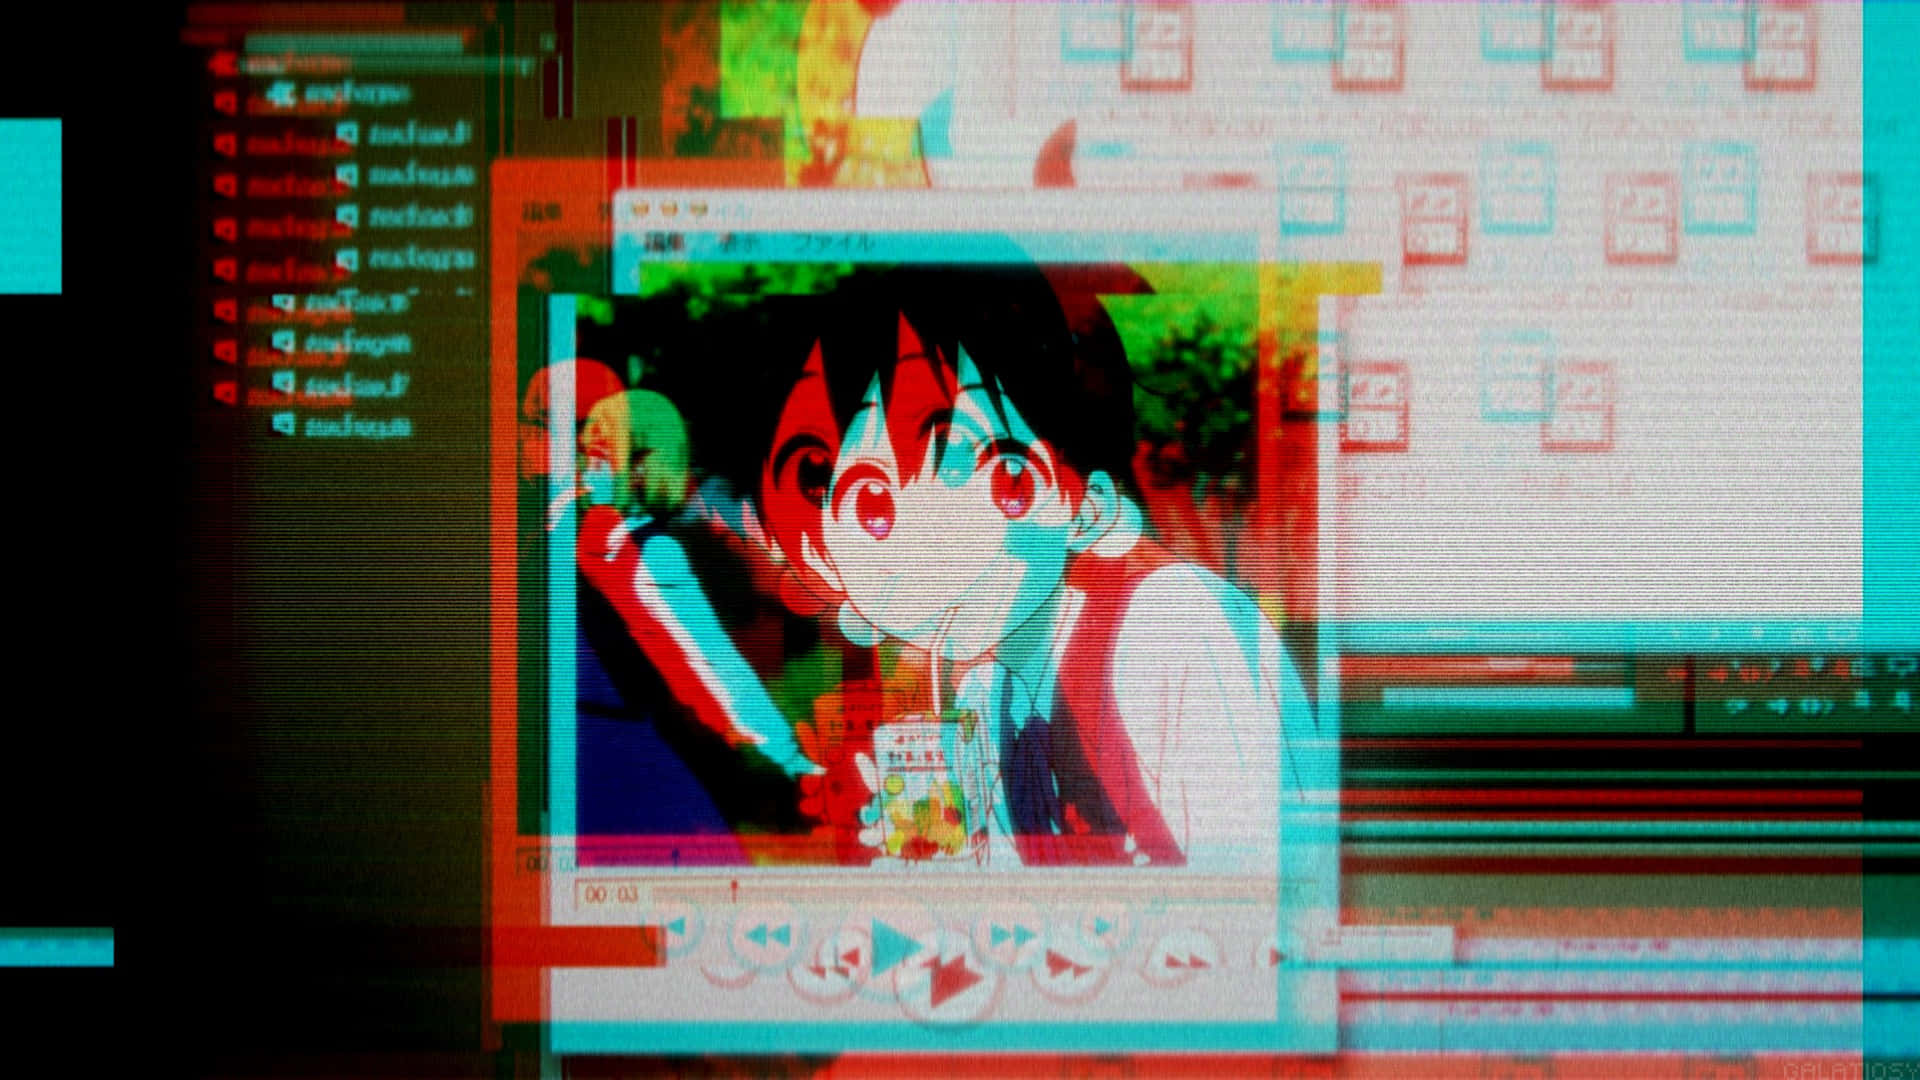 A Computer Screen With Anime Characters On It